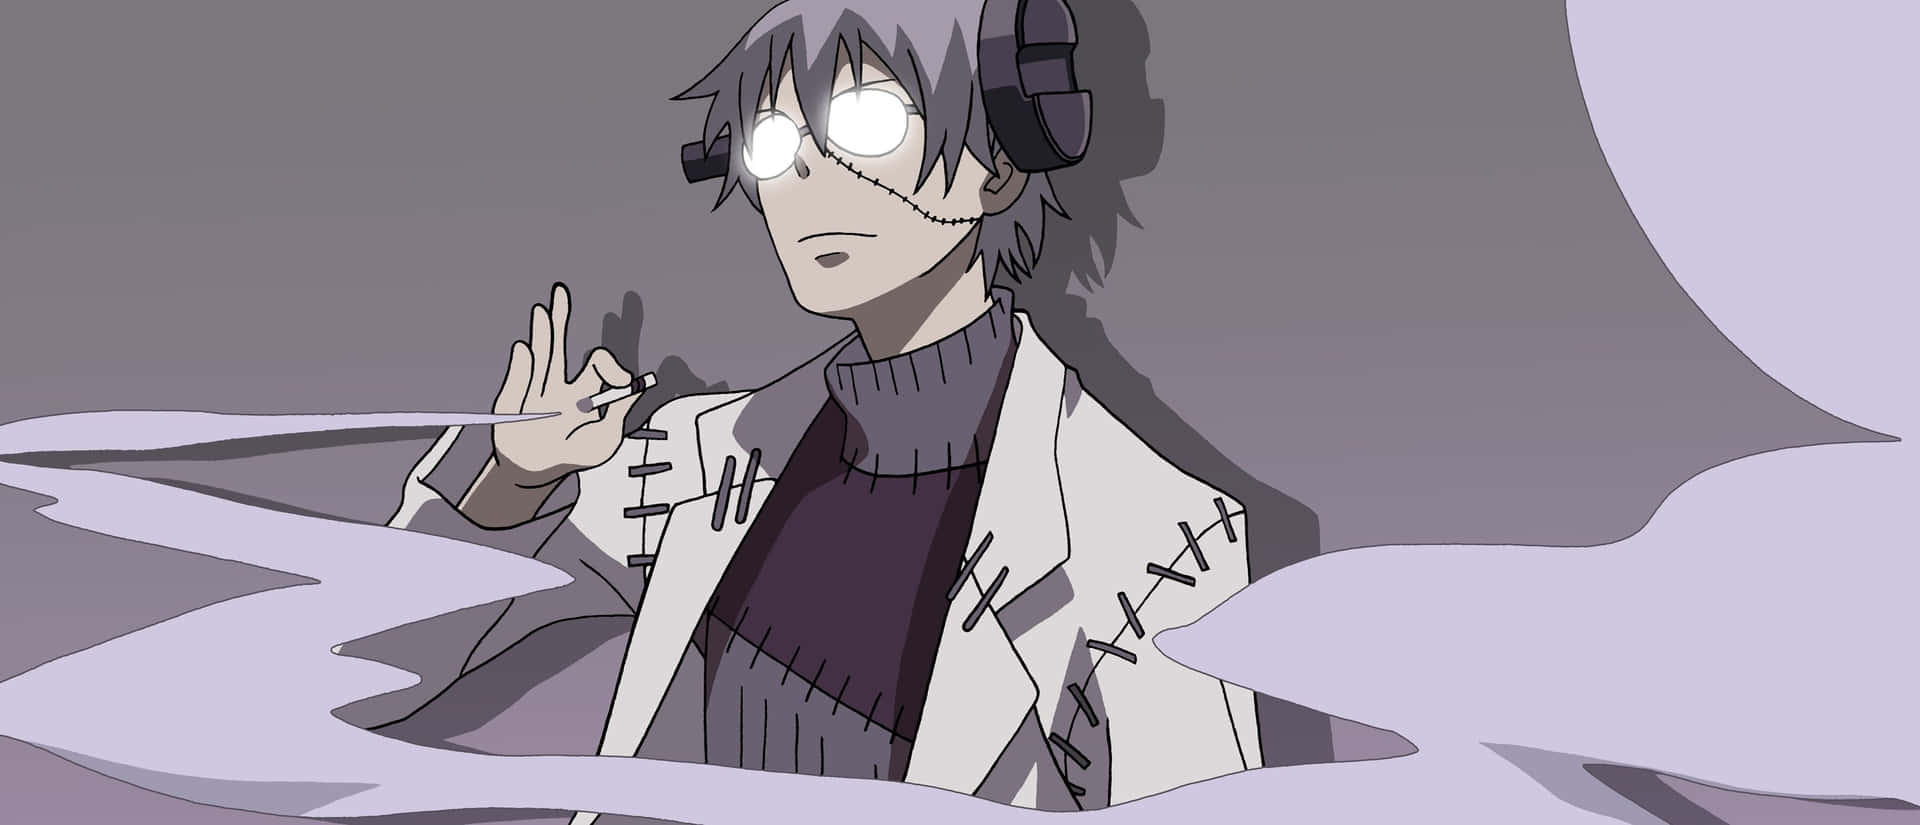 The Eccentric Genius, Dr. Stein From Soul Eater Wallpaper